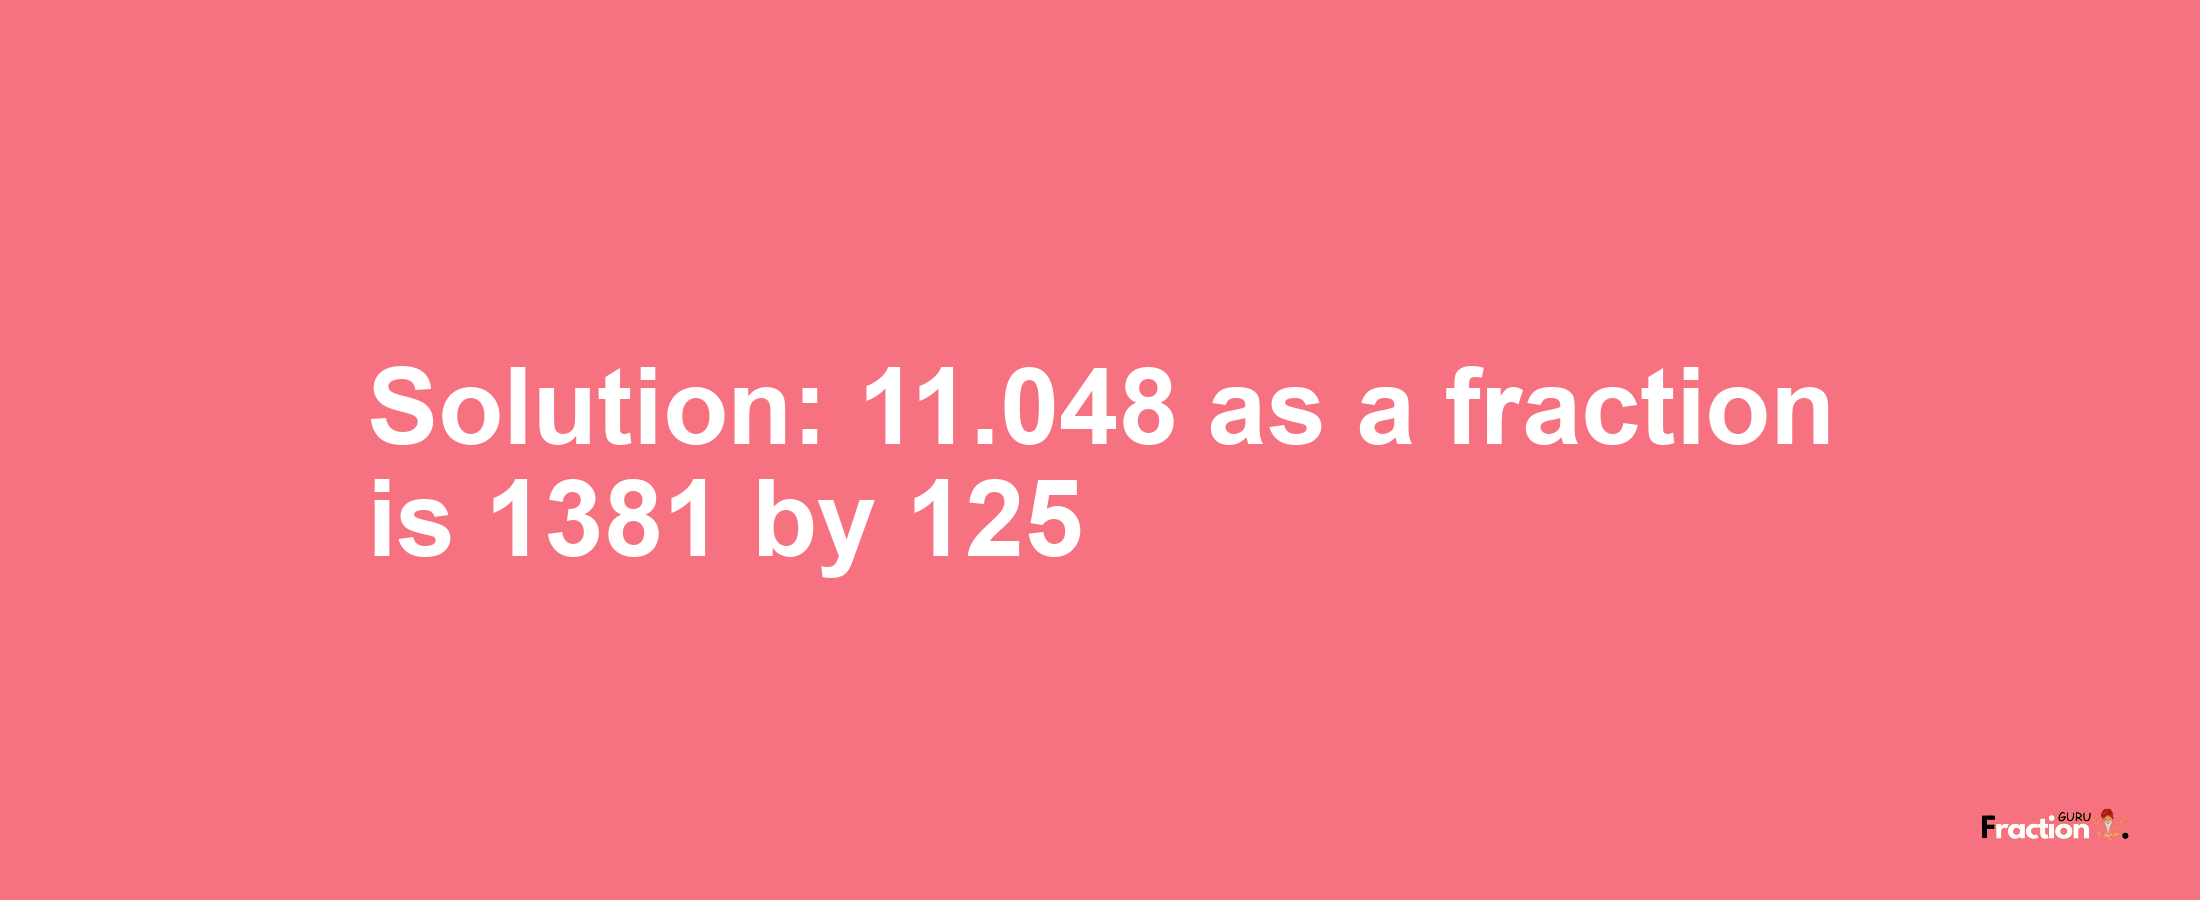 Solution:11.048 as a fraction is 1381/125